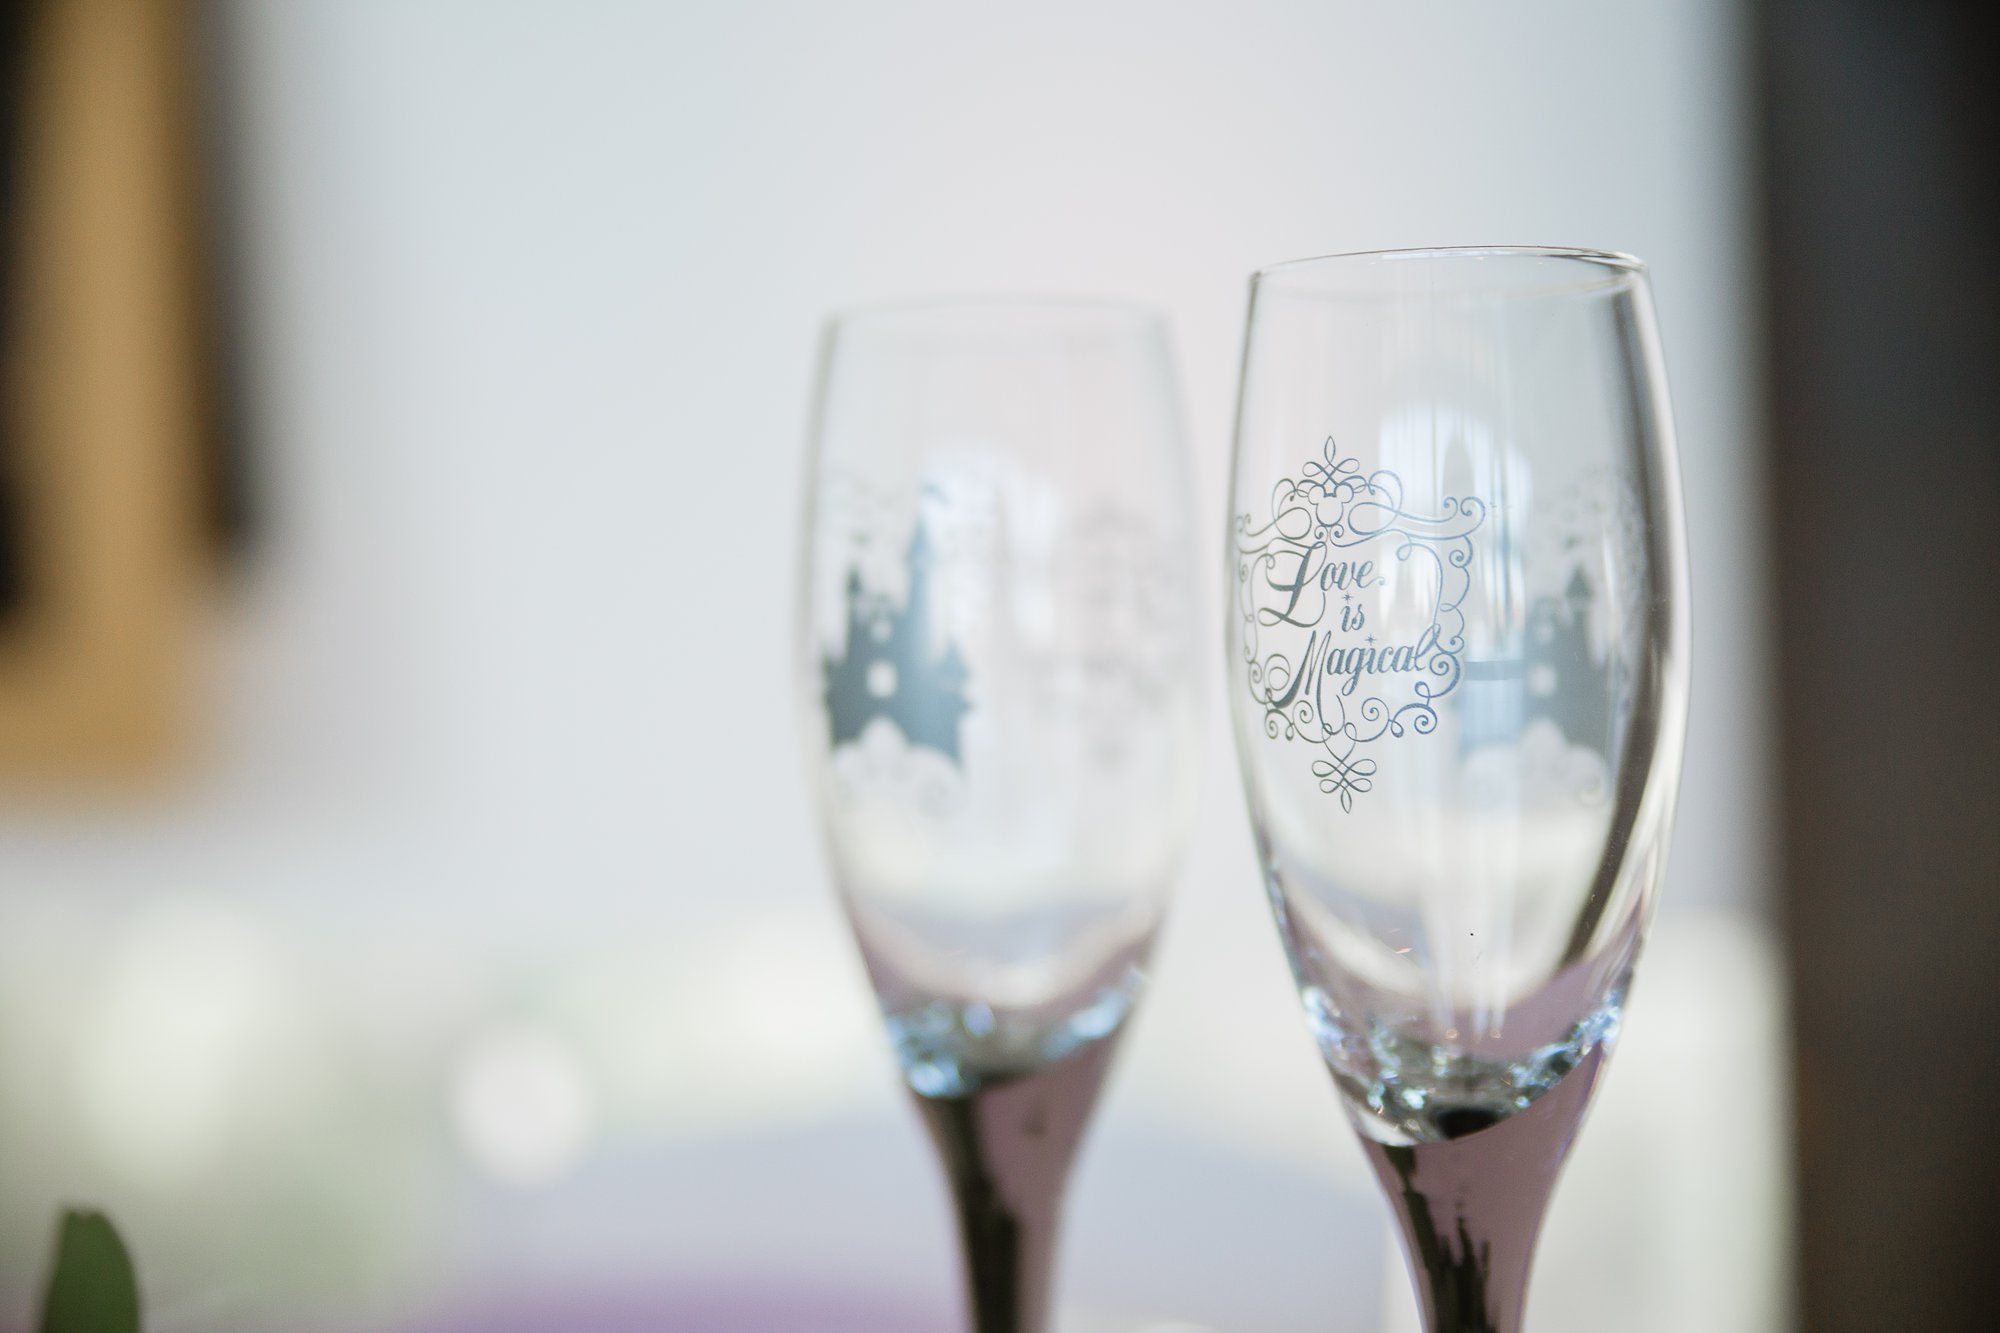 Disney wedding champagne glasses for the bride and groom.